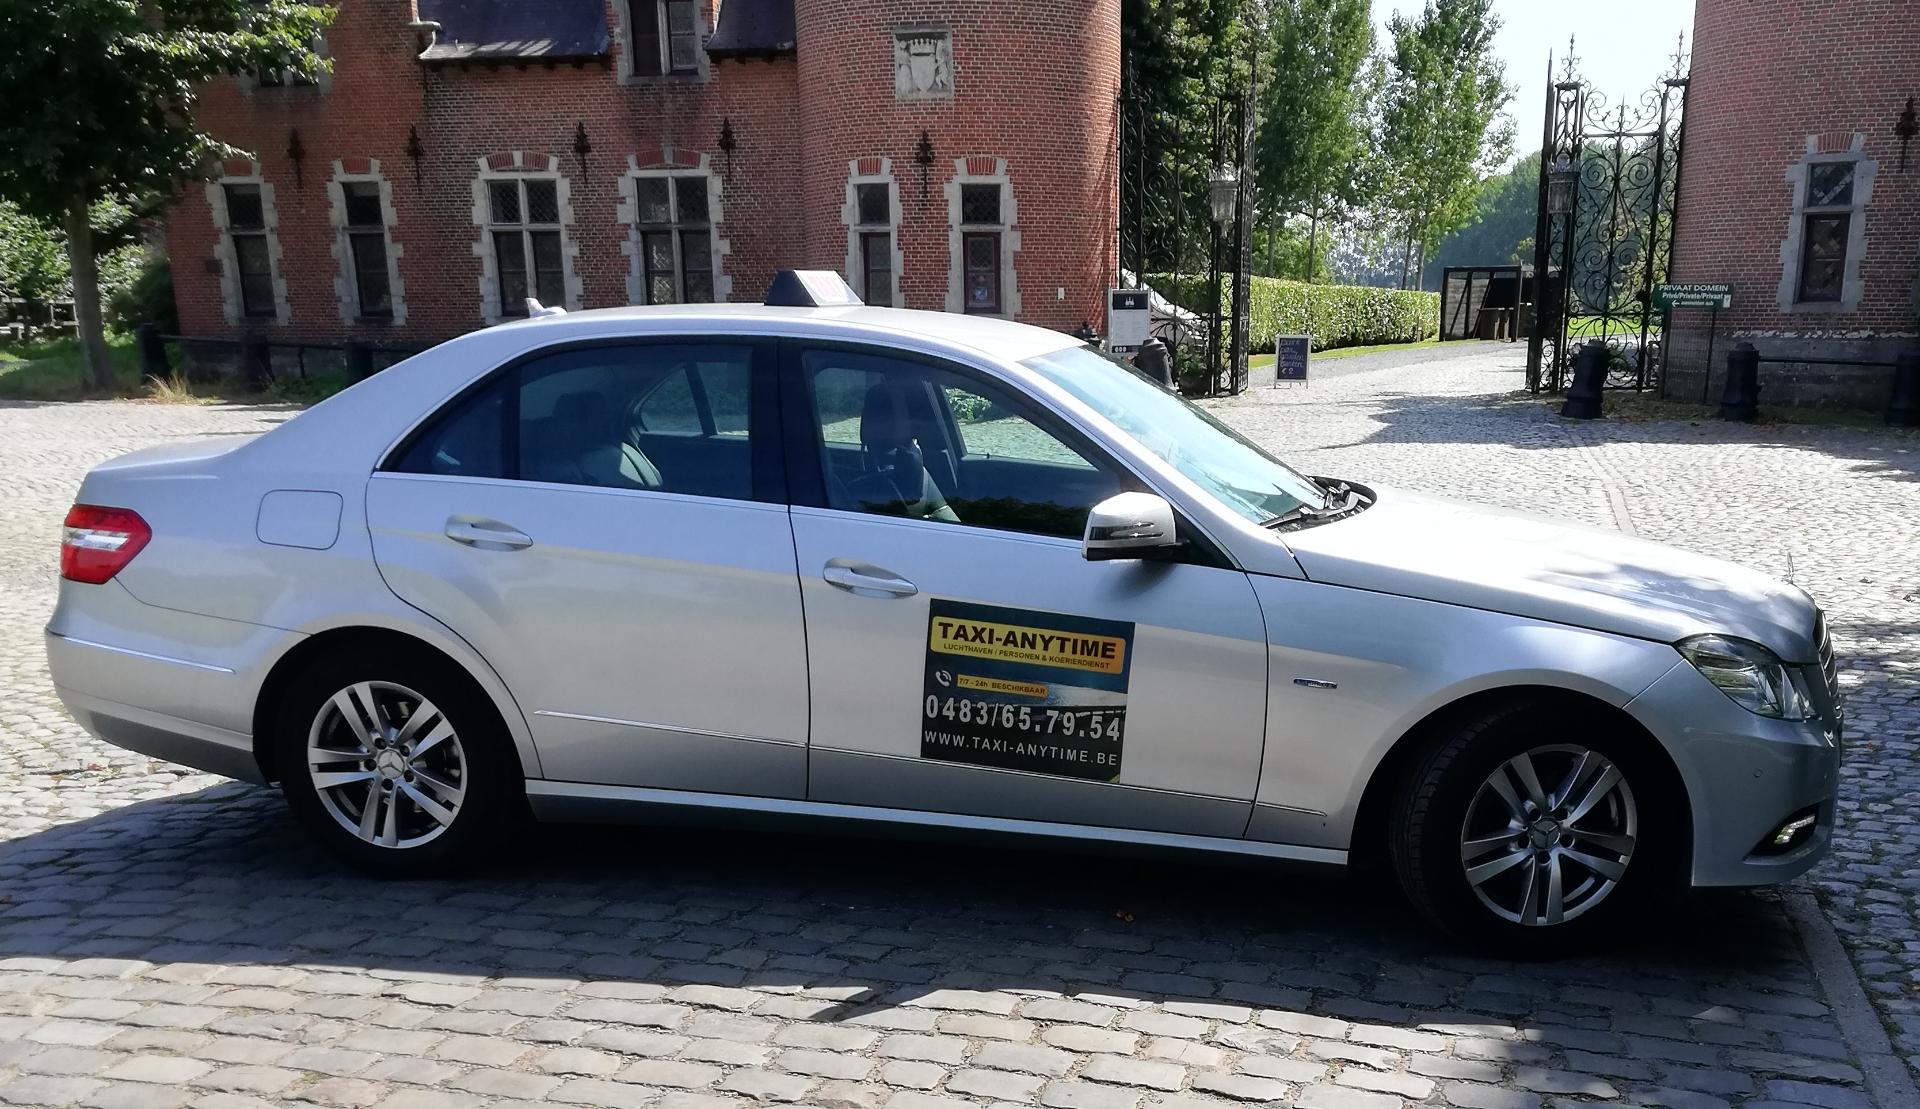 taxibedrijven Brugge Taxi Anytime